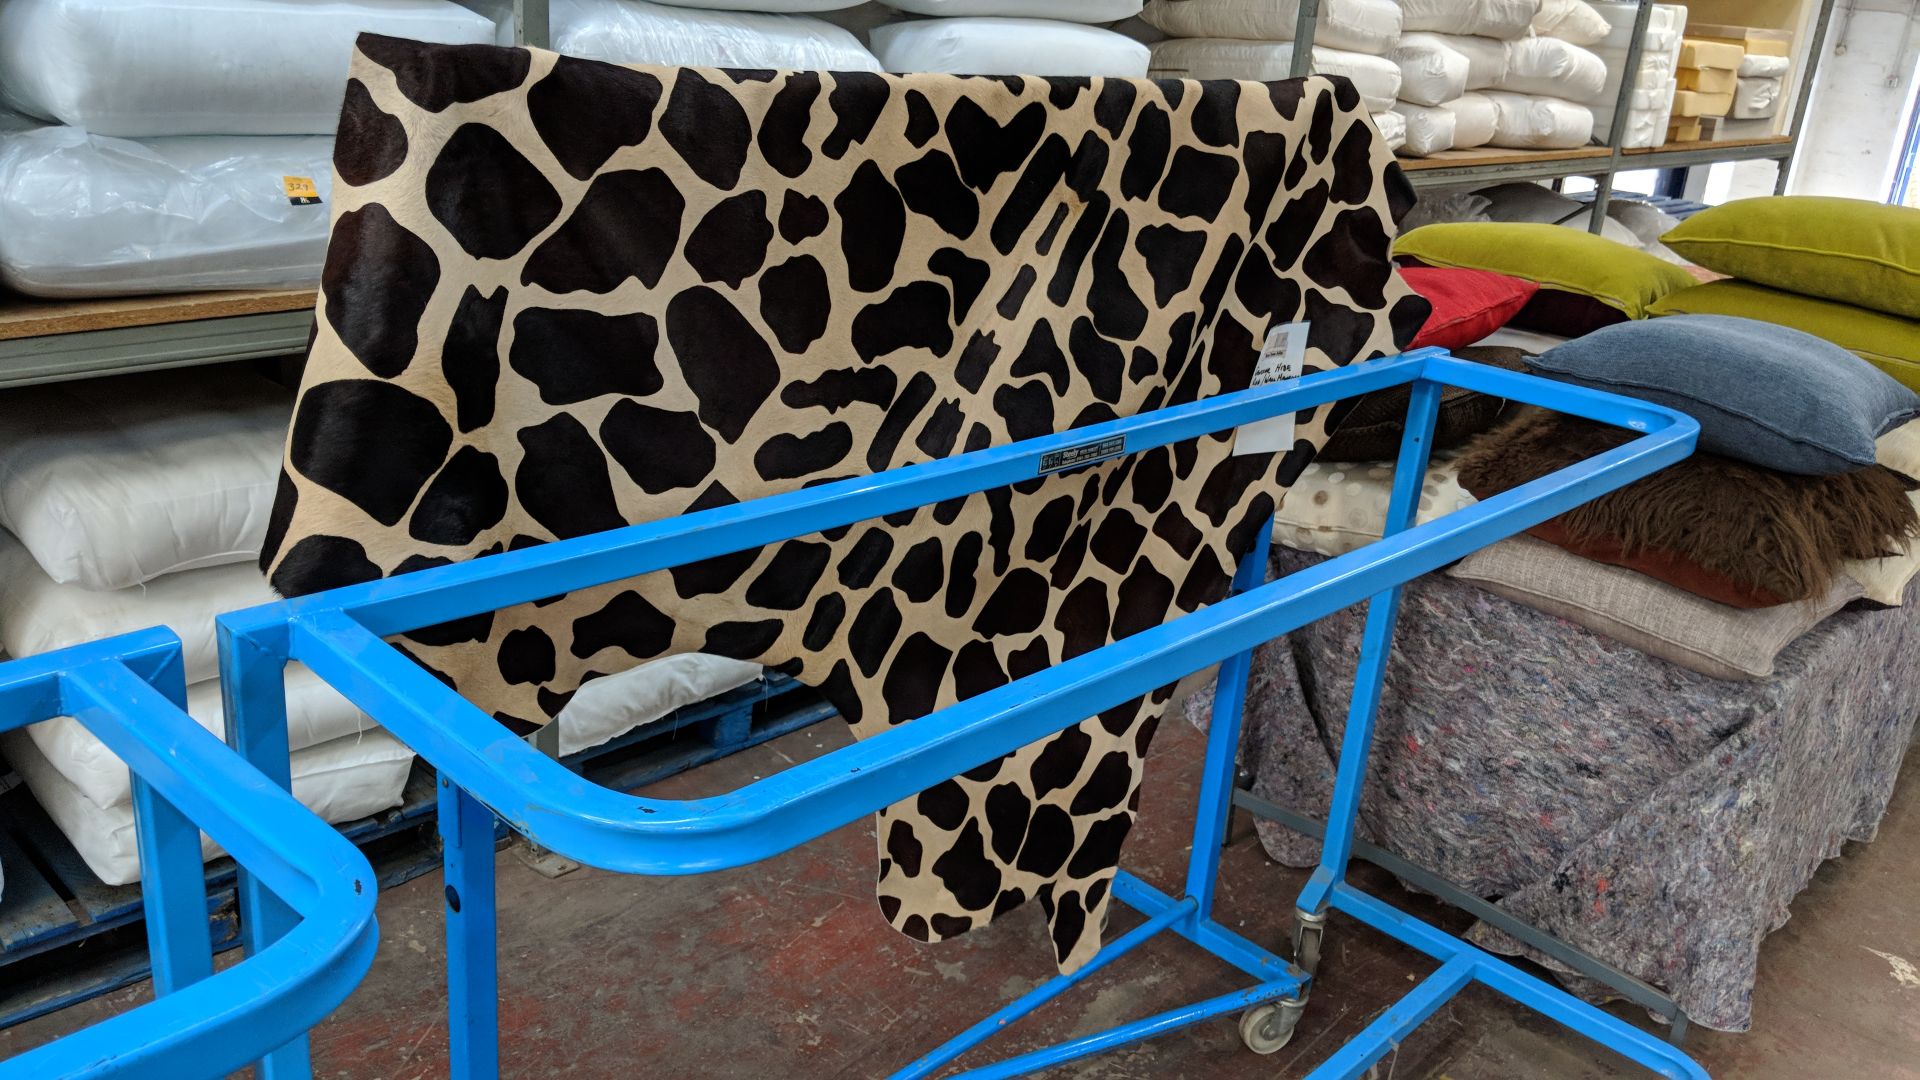 Genuine hide in giraffe design IMPORTANT: Please remember goods successfully bid upon must be paid - Image 3 of 3